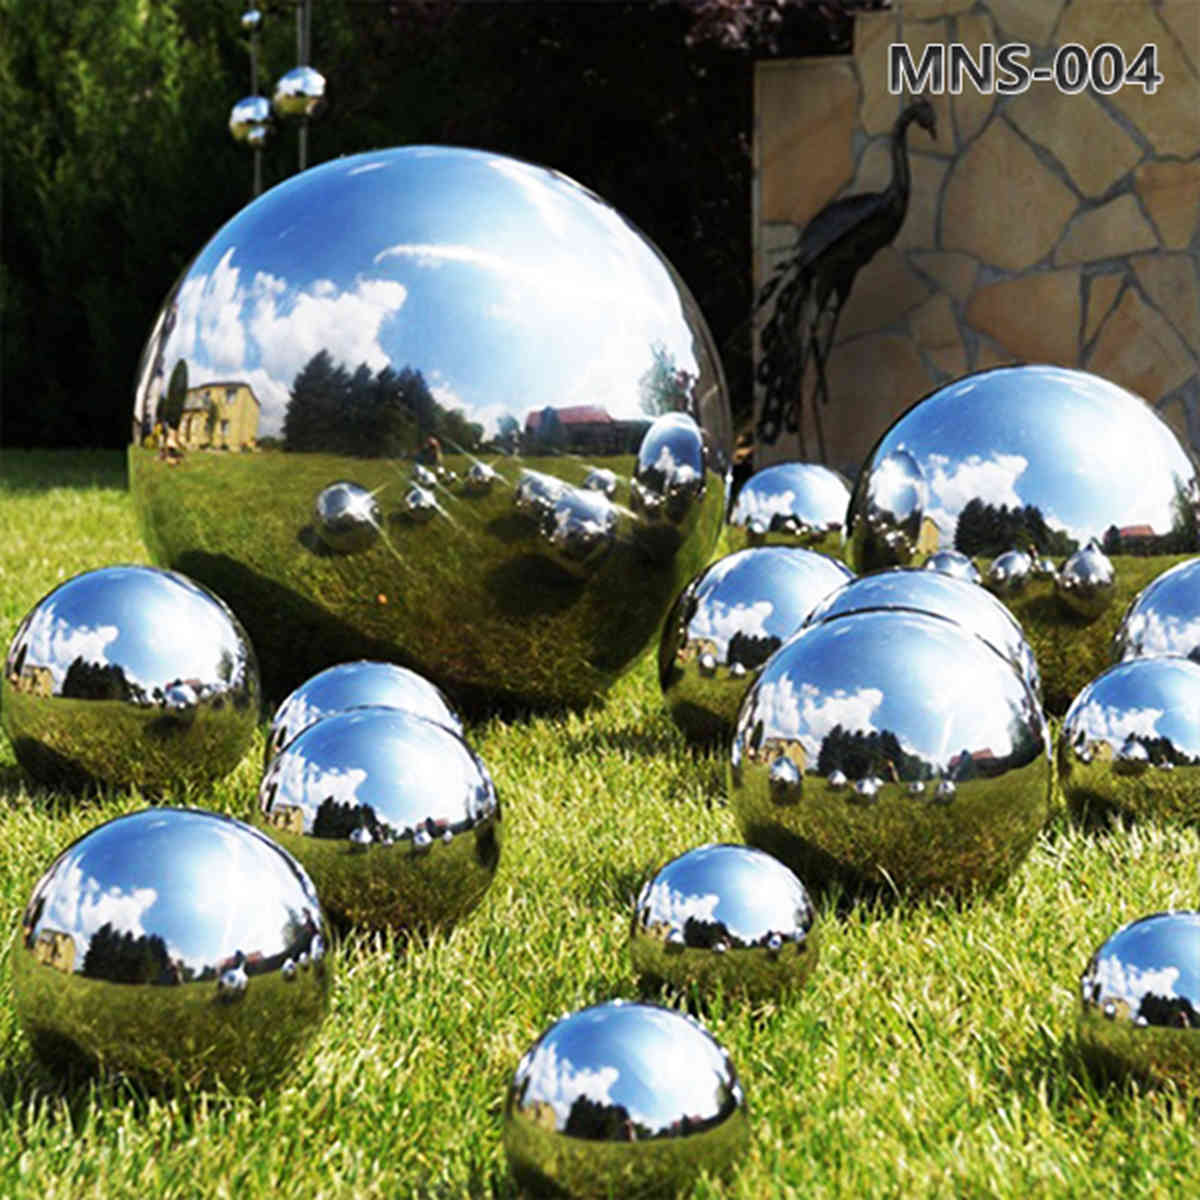 Mirror Polished Stainless Steel Sphere Sculpture for Garden MNS-004